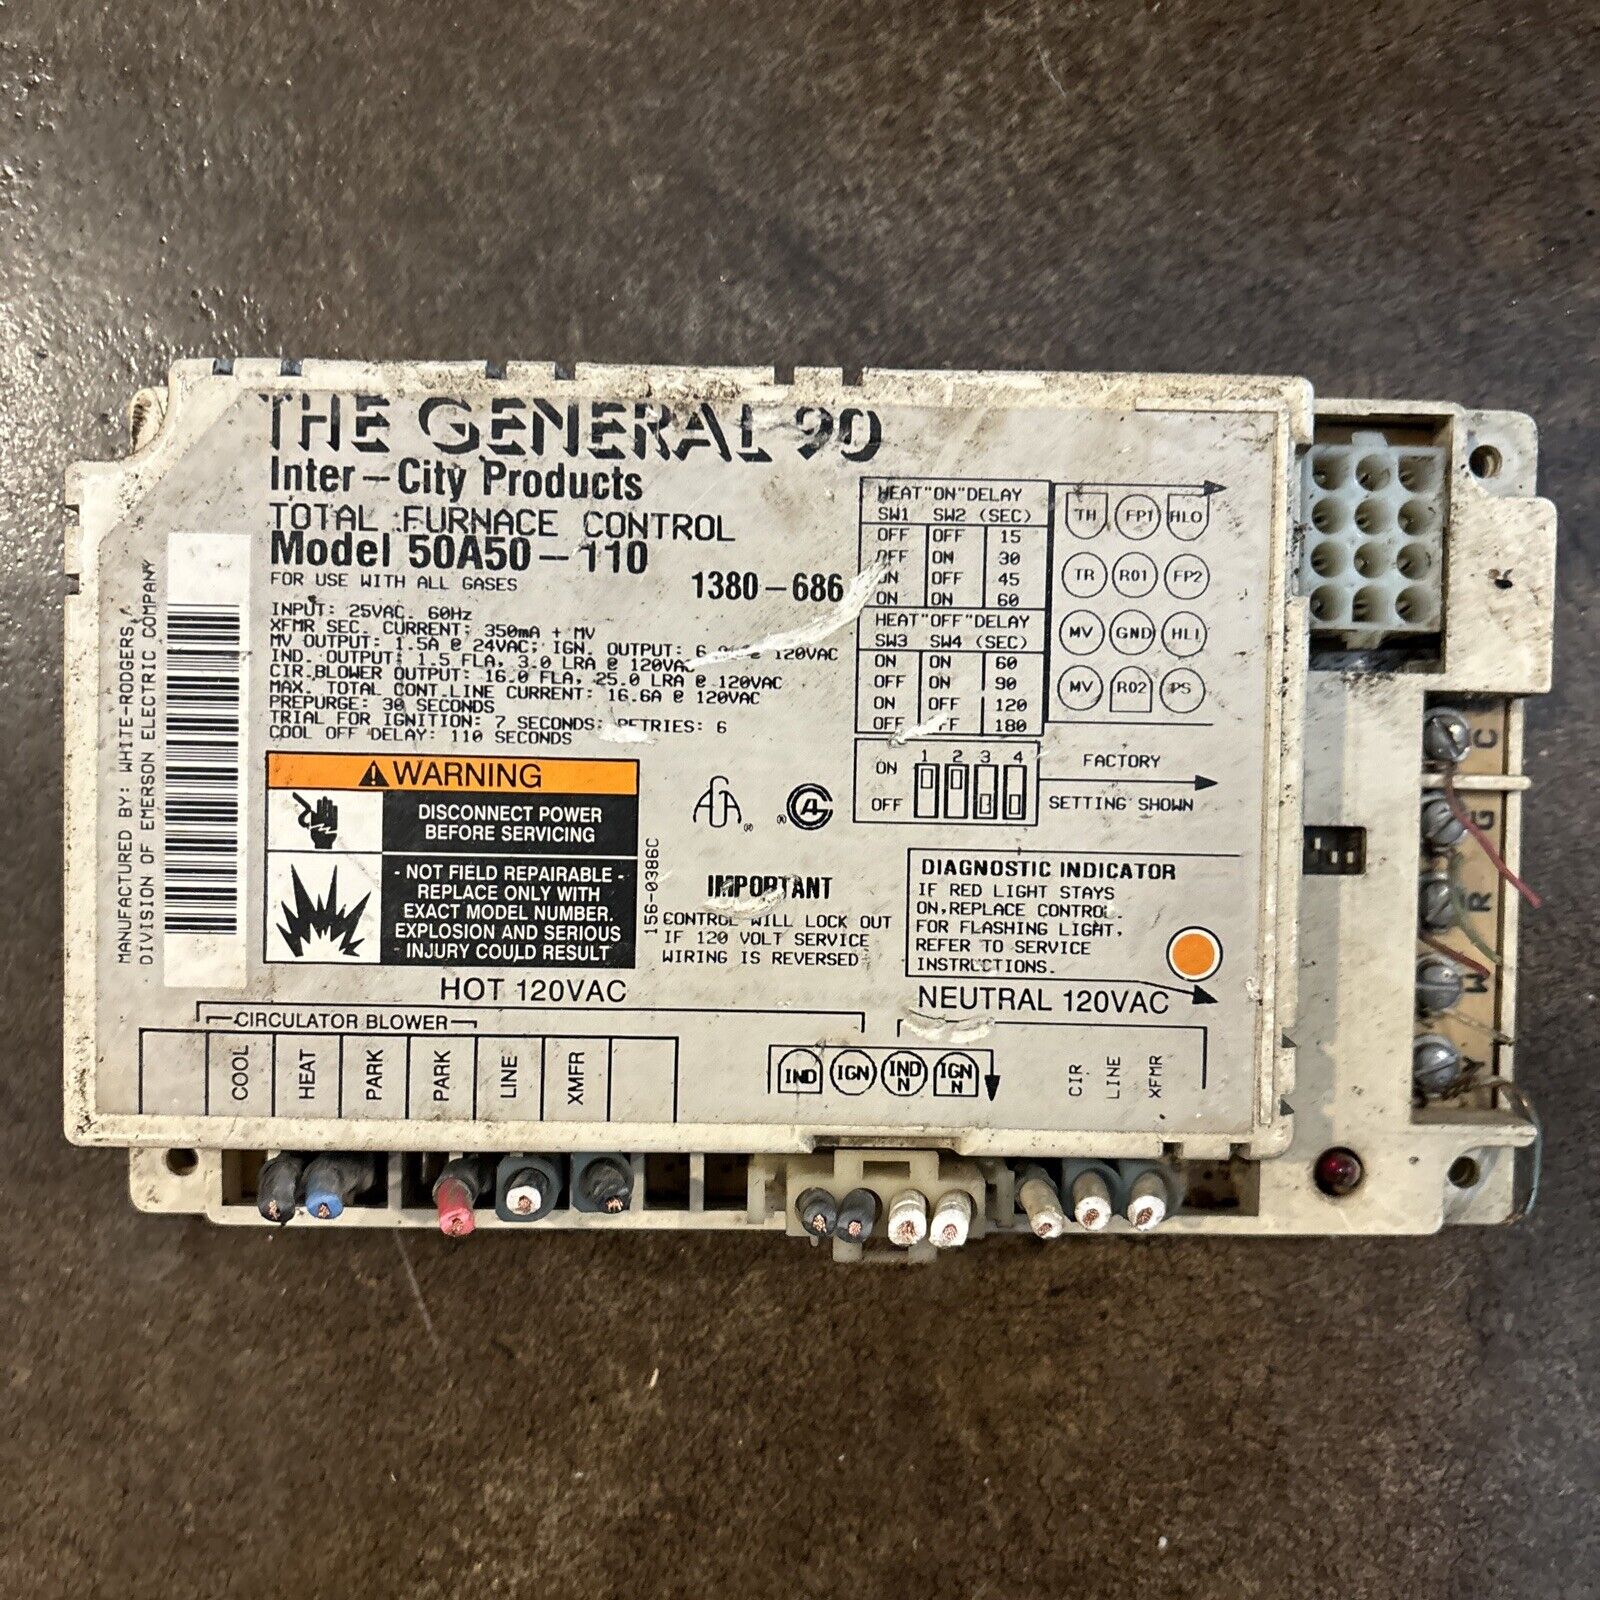 50A50-110 THE GENERAL 90 White Rodgers Total Furnace Control Board 1380-686